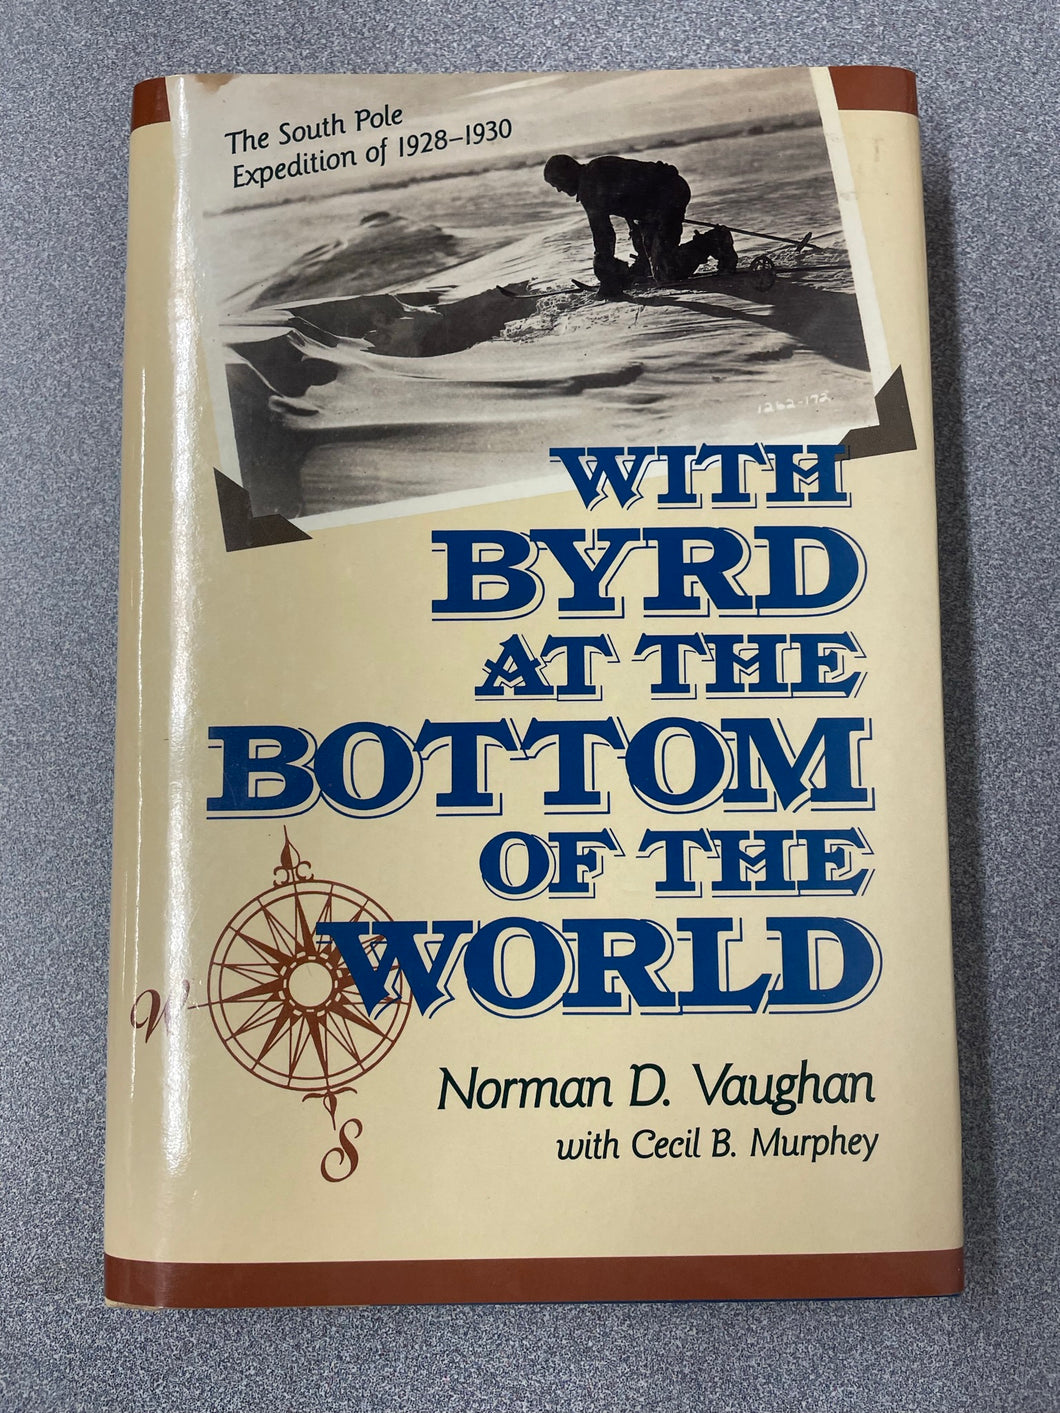 With Byrd at the Bottom of the World: the South Pole Expedition of 1928-1930, Vaughan, Norman D. and Cecil B. Murphey [1990] TS 11/22